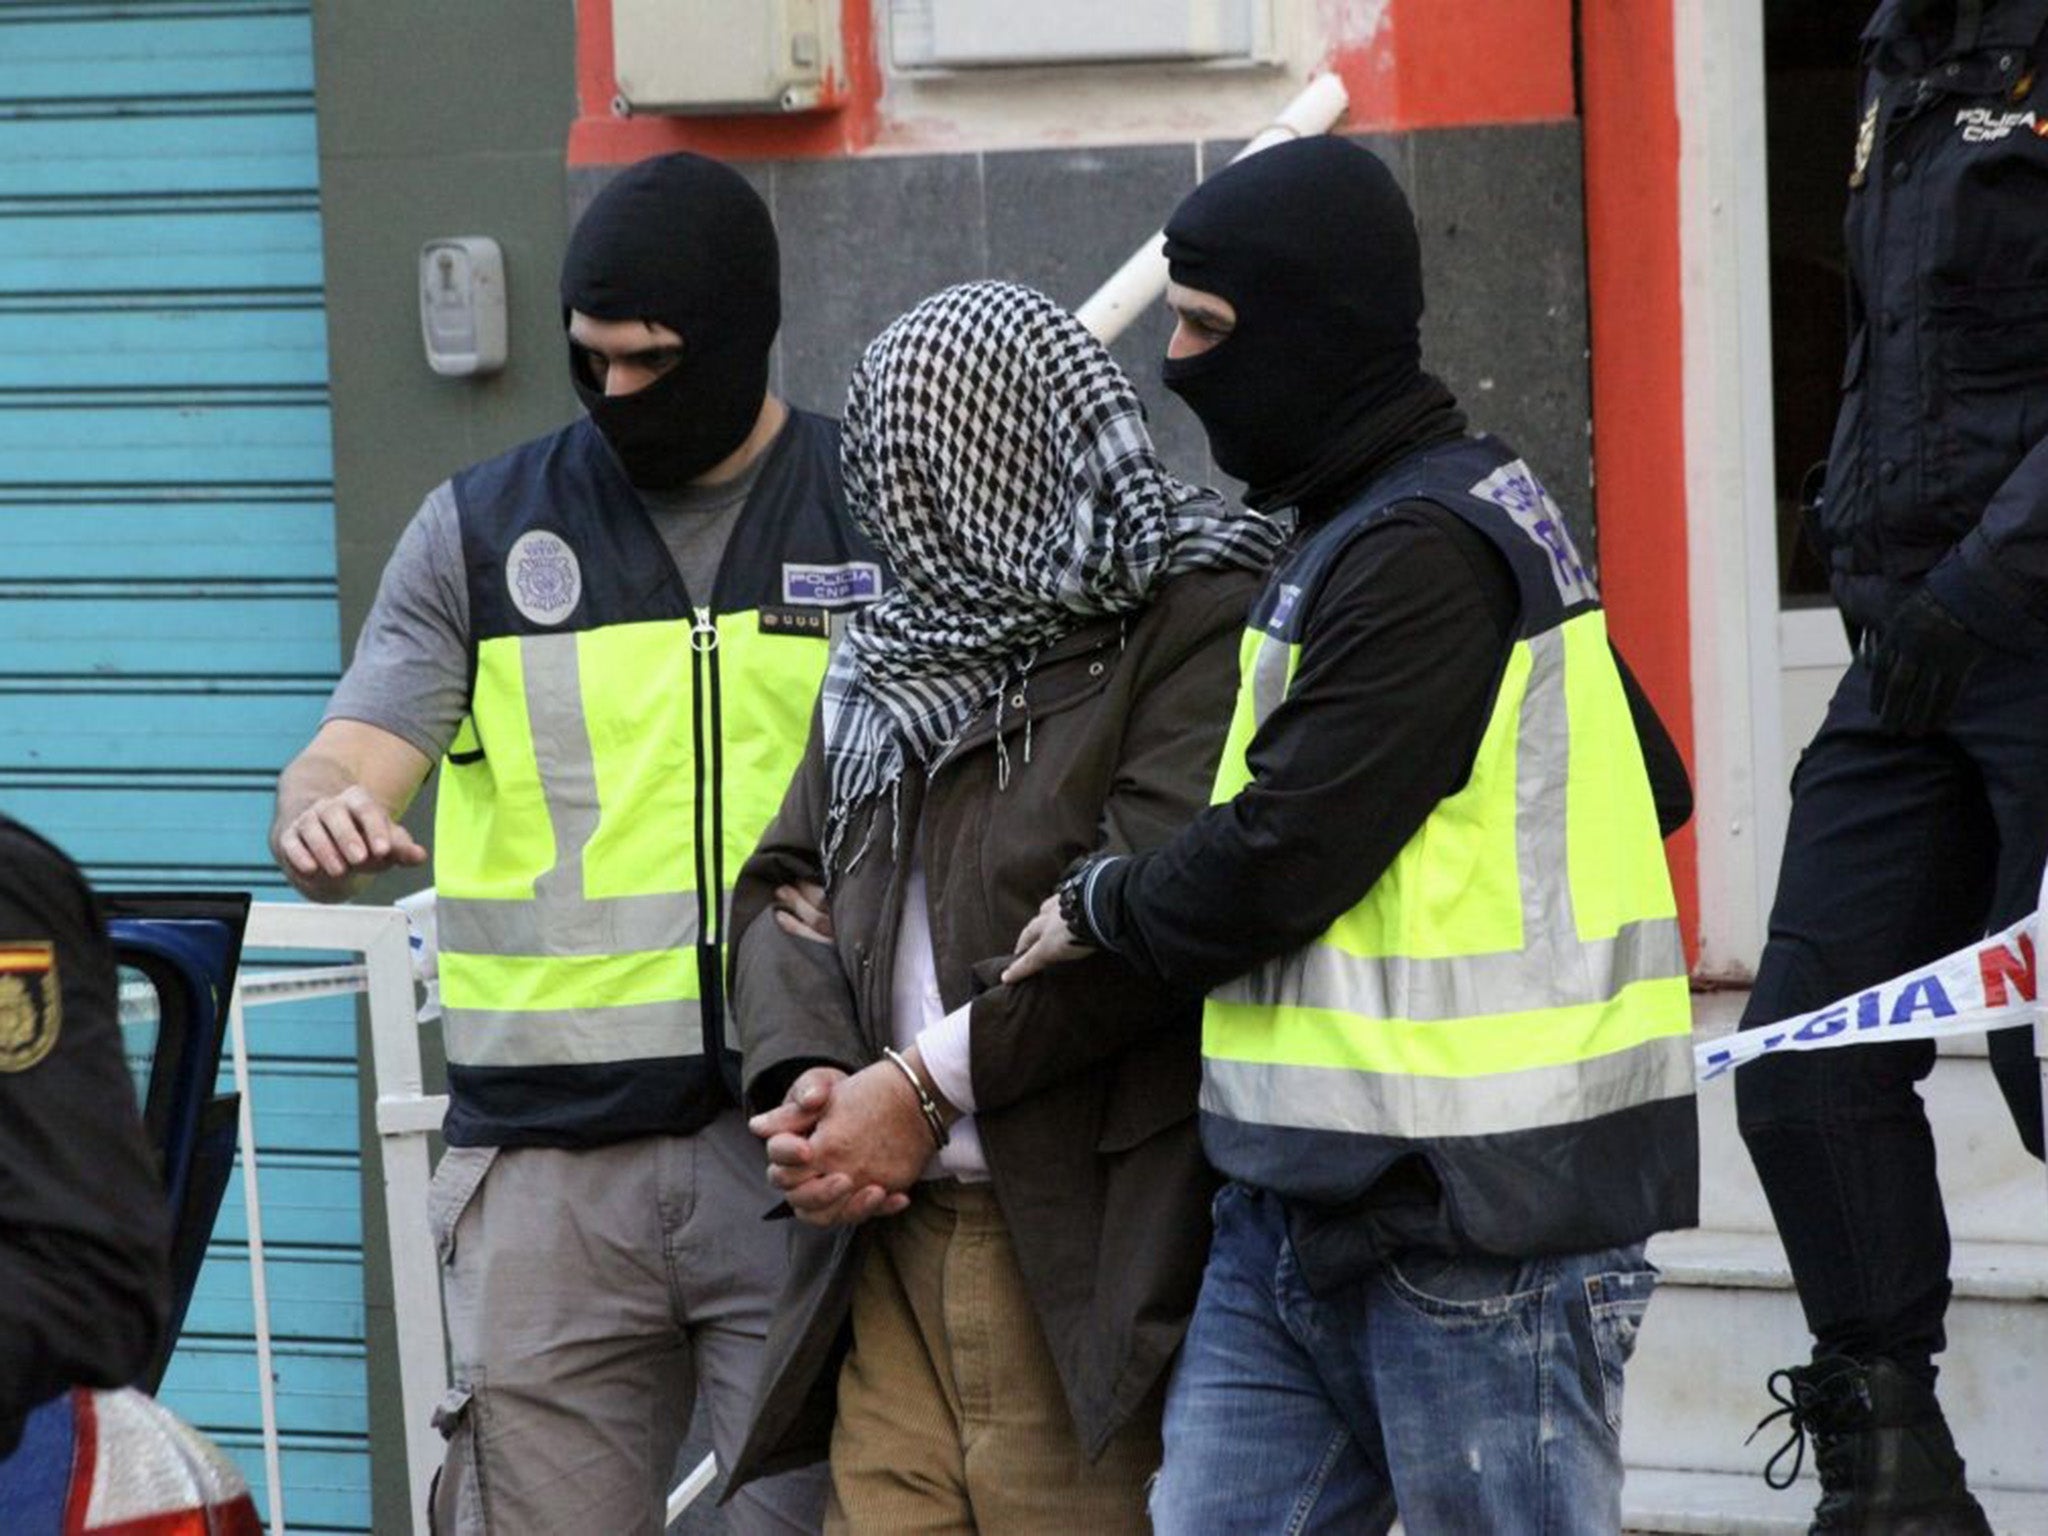 A suspected member of the terror cell is led away by police in Ceuta, Spain's North African enclave